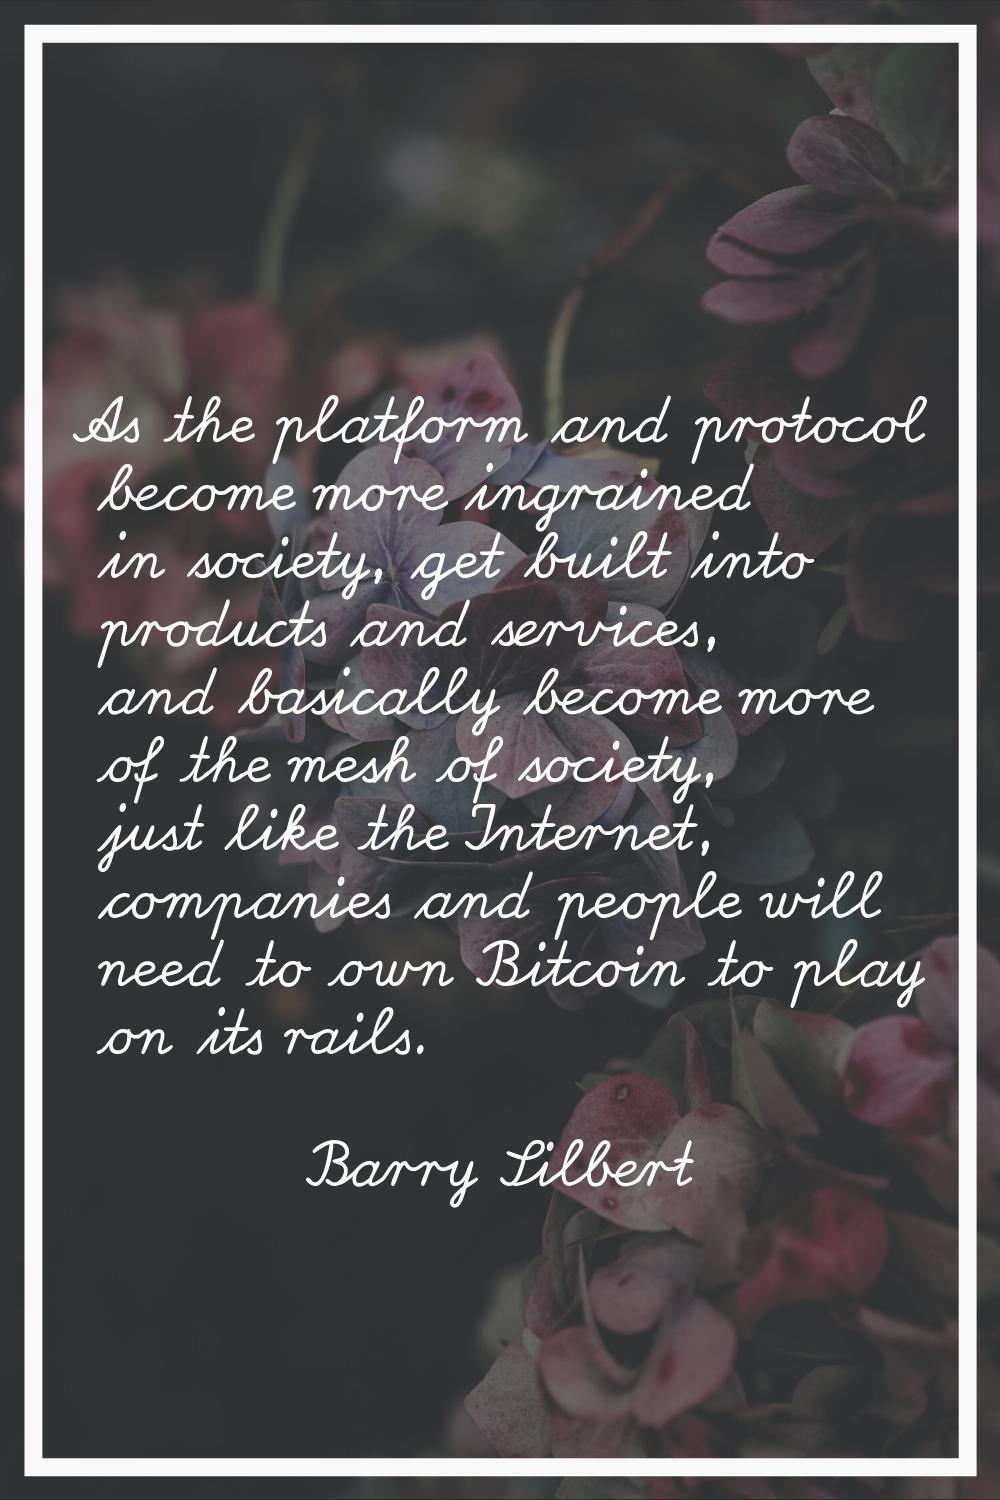 As the platform and protocol become more ingrained in society, get built into products and services